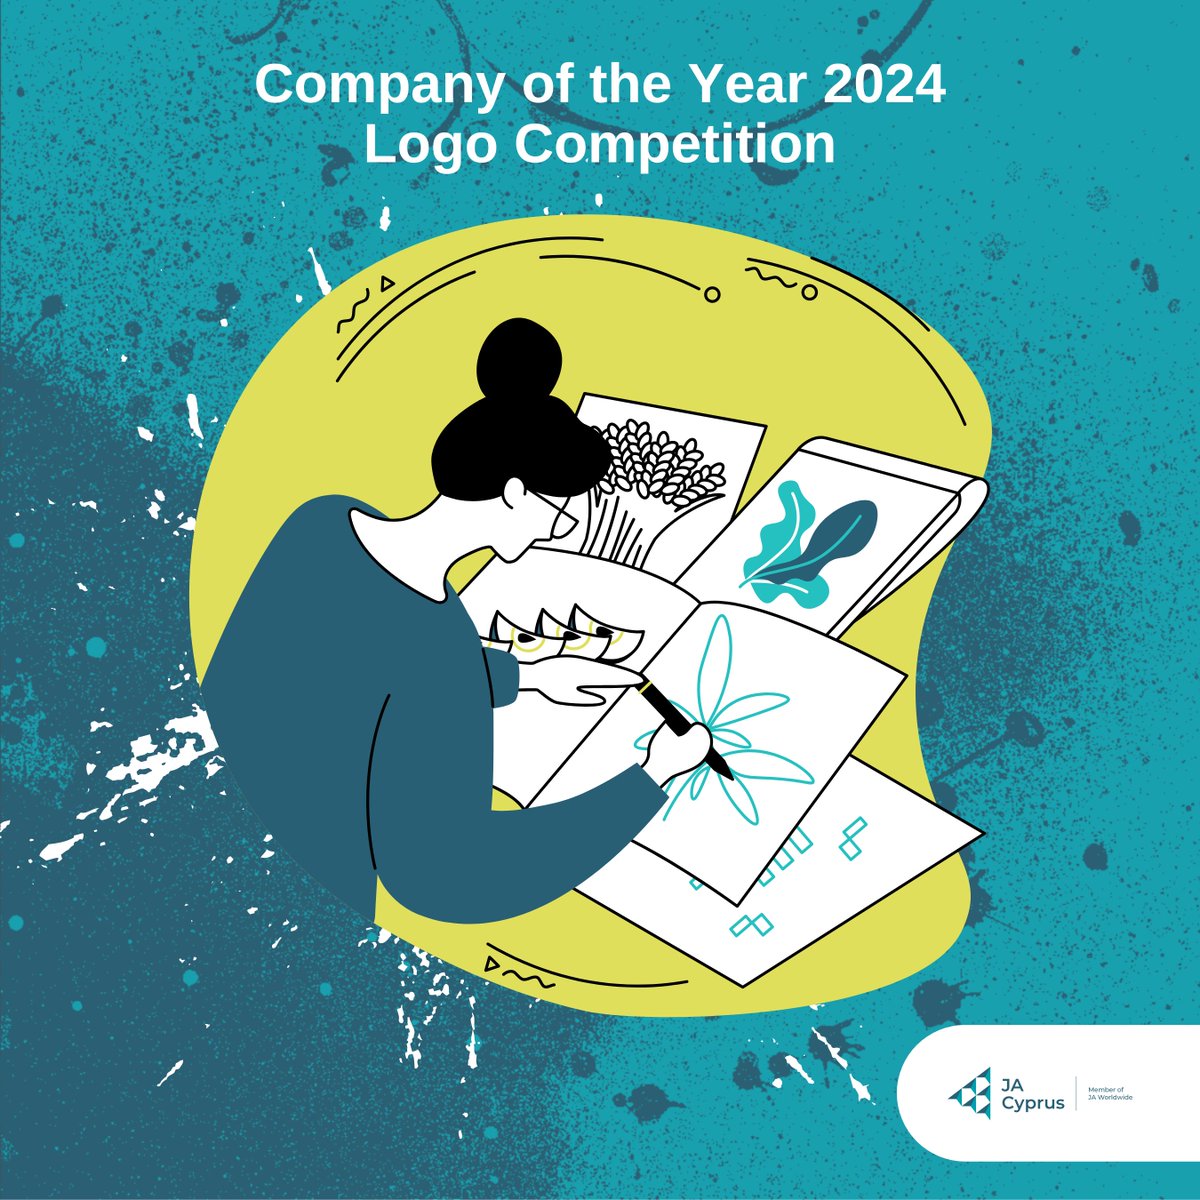 🌟🚀 The COY24 Logo Contest is in full swing! 🎨🔥 Cast your votes for up to 5 of your favorite logos from our student companies. 🗳️ Click the link below to make your vote count! 🌐✨ #COY24 #LogoContest #StudentInnovation #votenow shorturl.at/etyF4